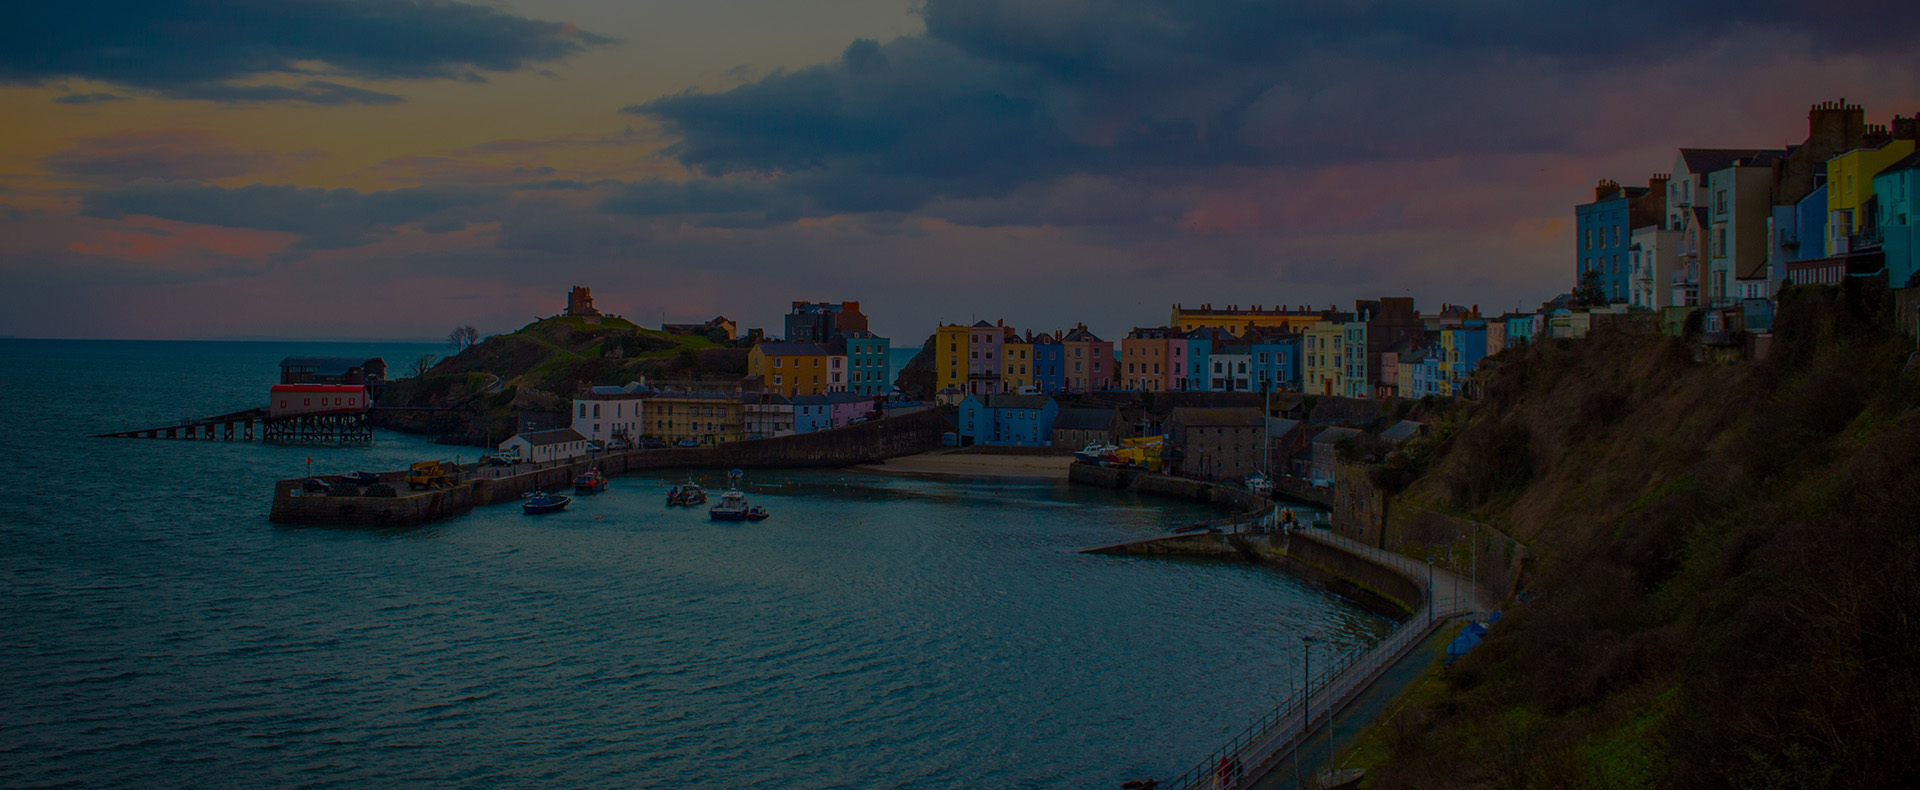 Tenby Harbour in Wales with colourful buildings lining the hill, a small beach, and a path running below grass.